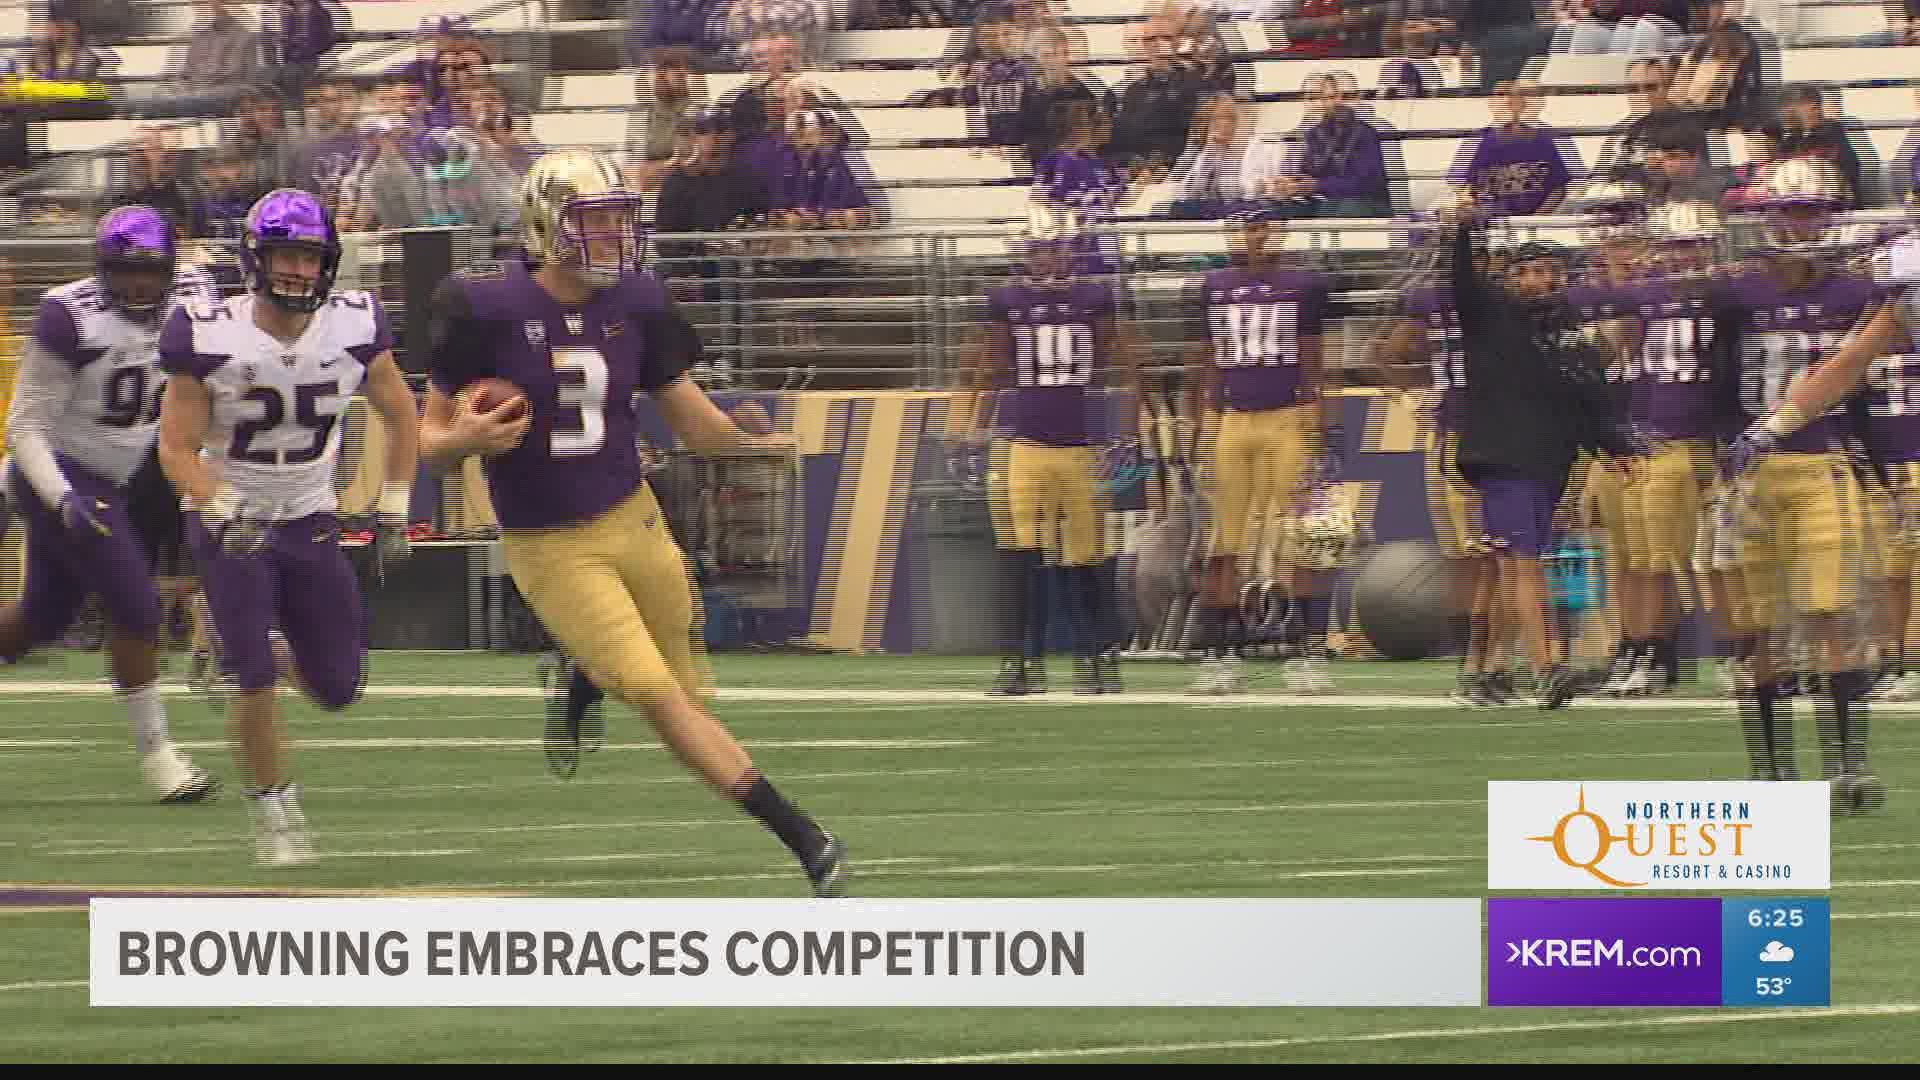 Chris Petersen has completely revamped the roster with great quarterbacks as senior Jake Browning will be pushed by younger players in practice.